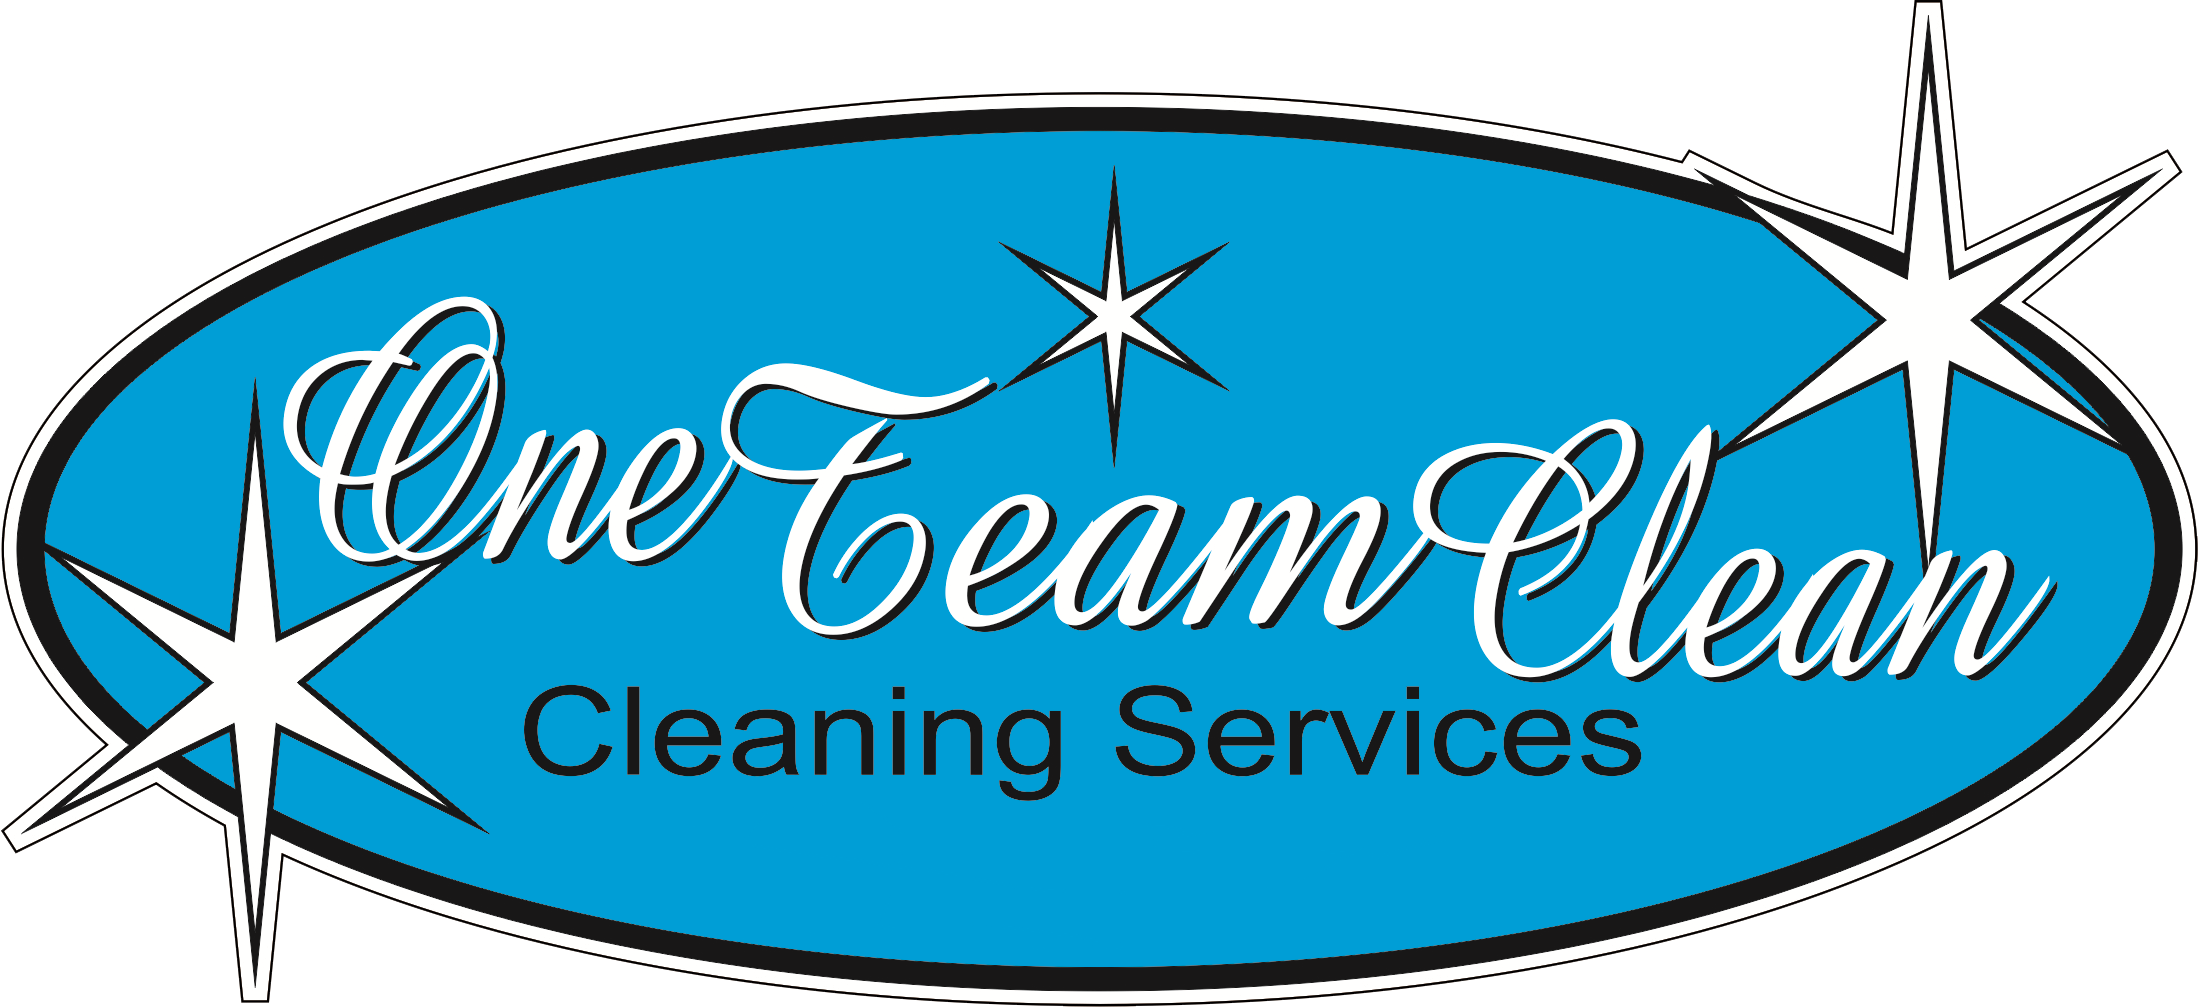 Contact Us For A Free Commercial Cleaning Quotation - Label (2198x1007)